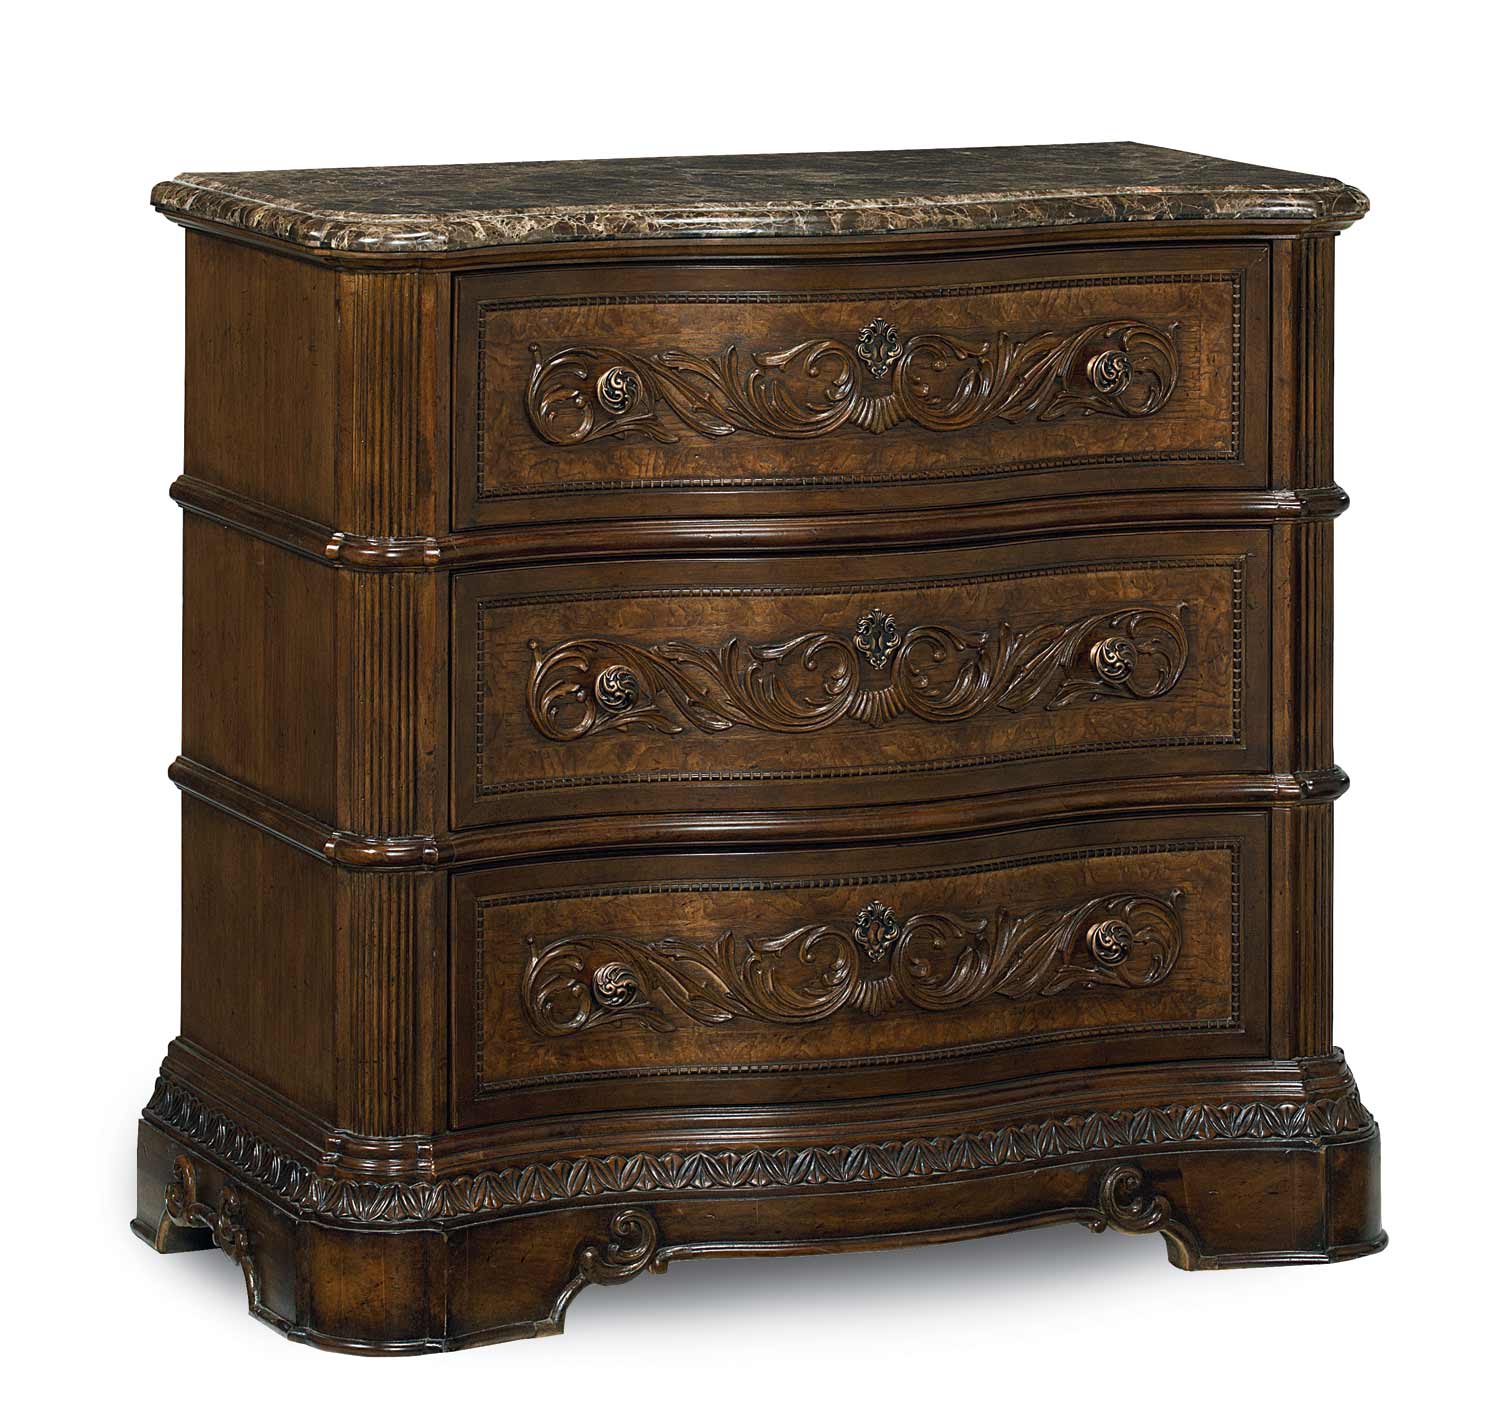 Legacy Classic Pemberleigh Bedside Chest - Brandy/Burnished Edges